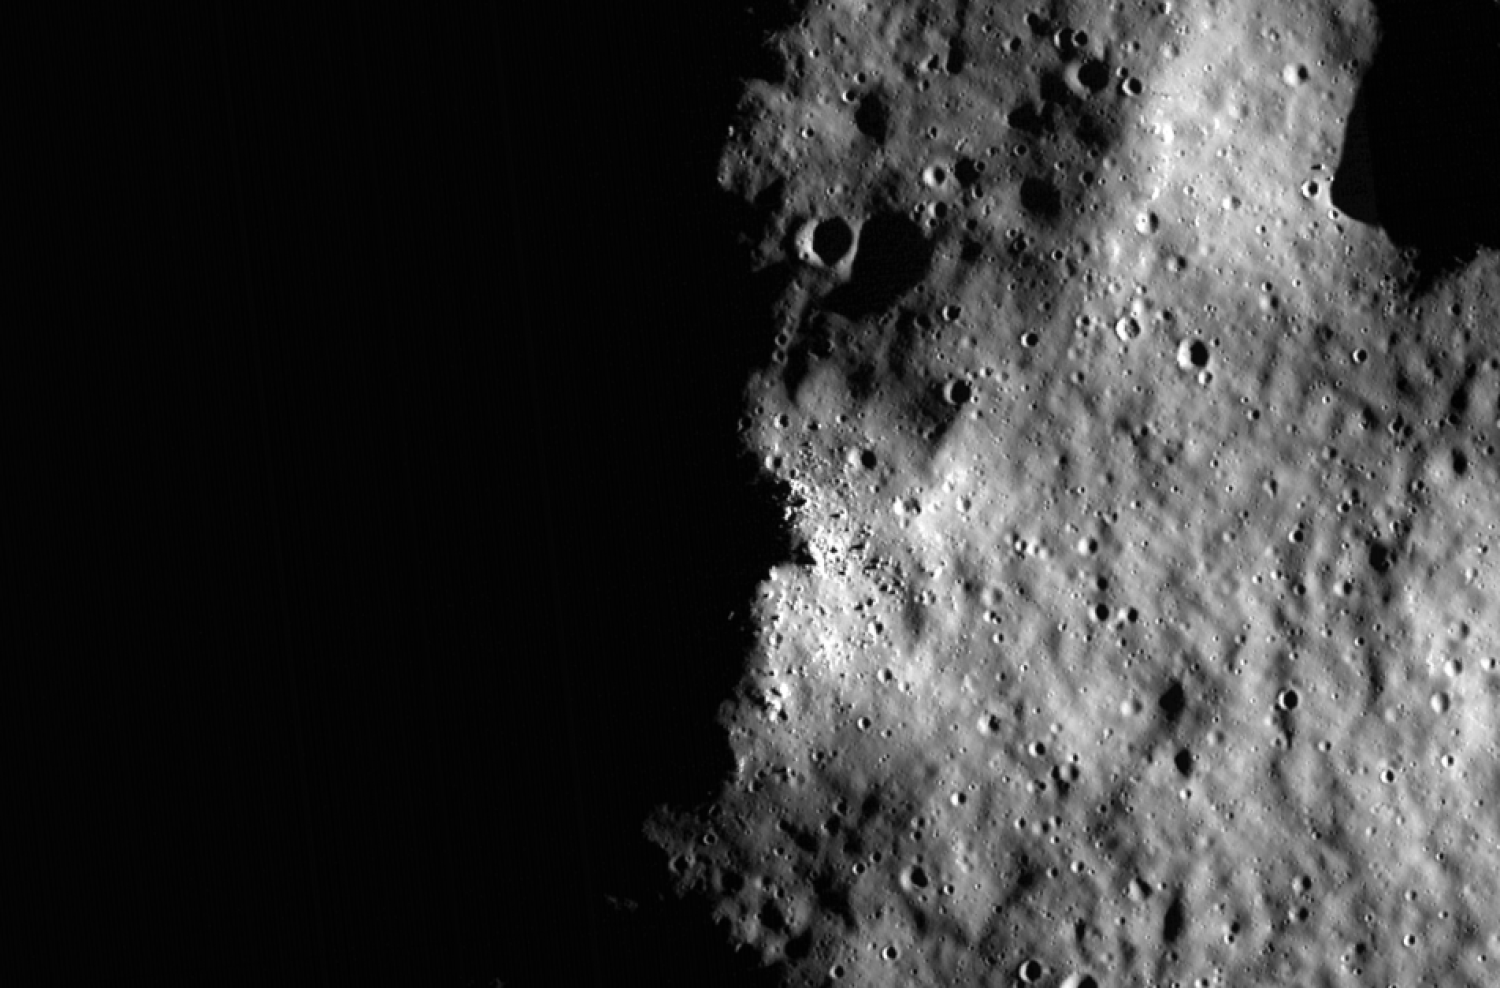 Shadows on the moon's surface